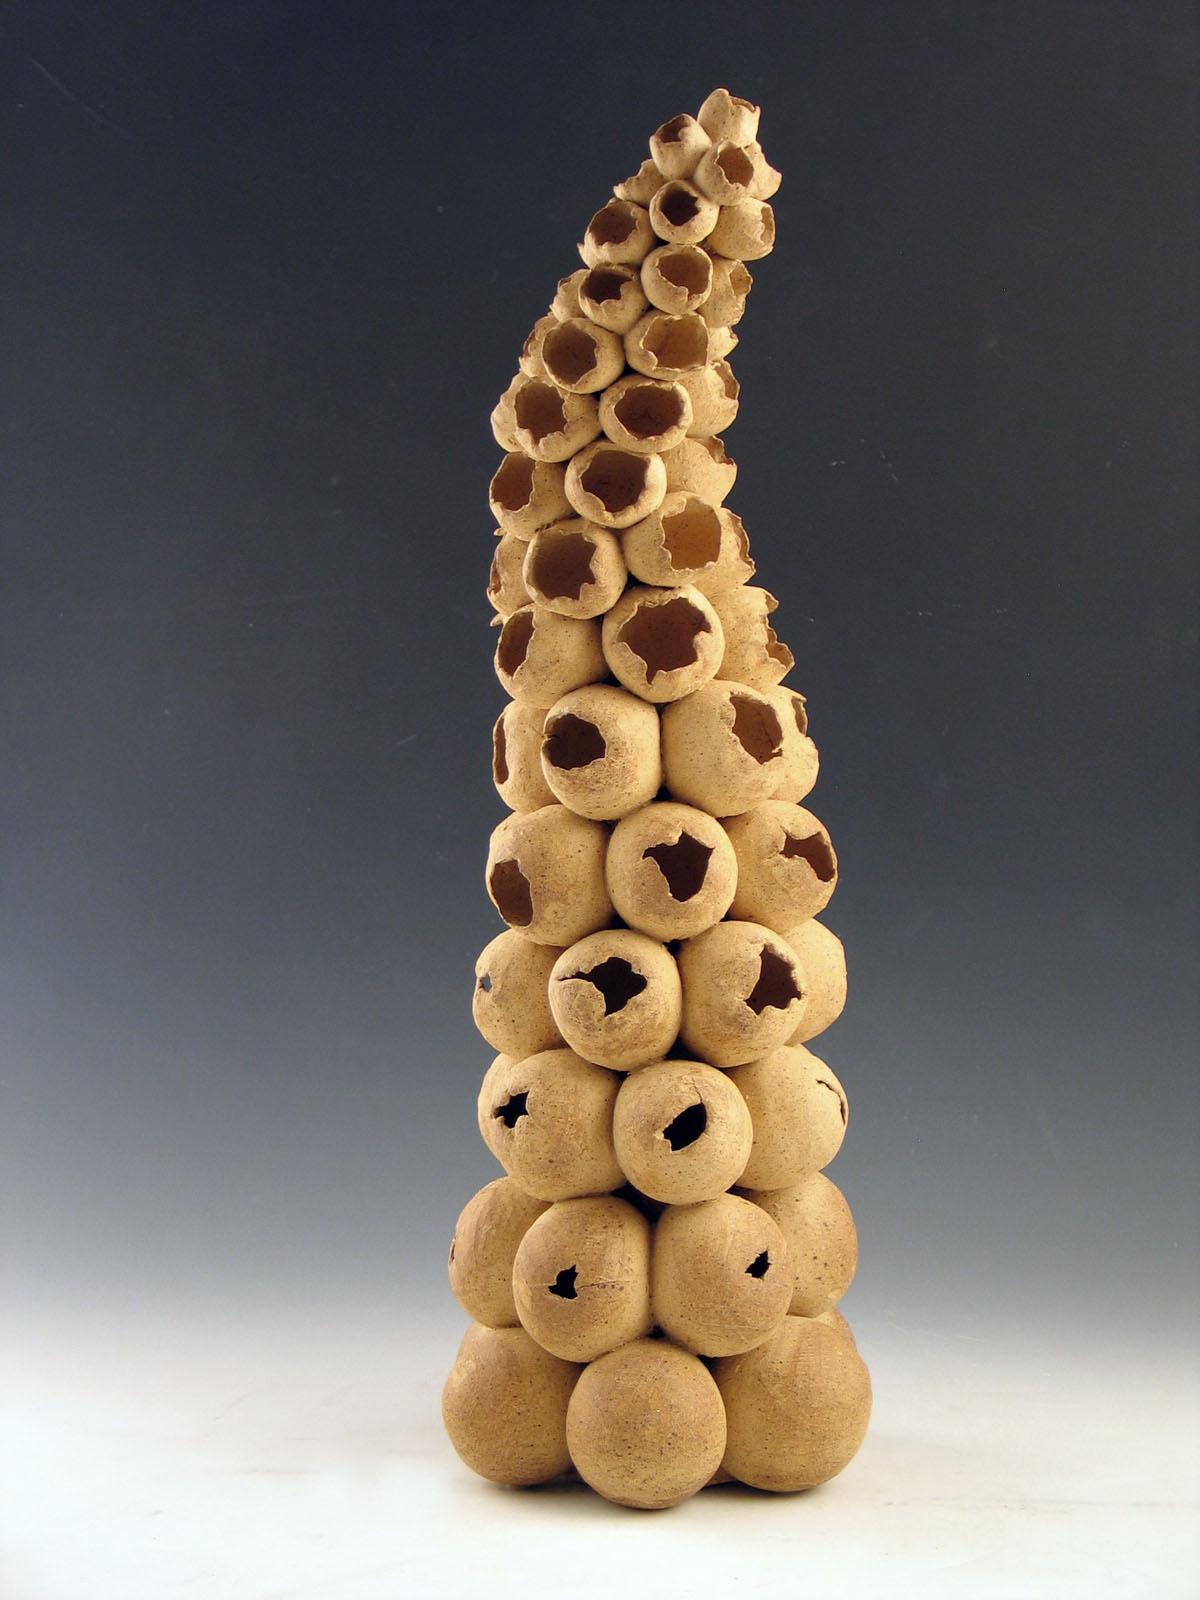 “Unfulfilled”, ceramic form covered with speckled beige seedpods - Abstract Sculpture by Elaine Lorenz